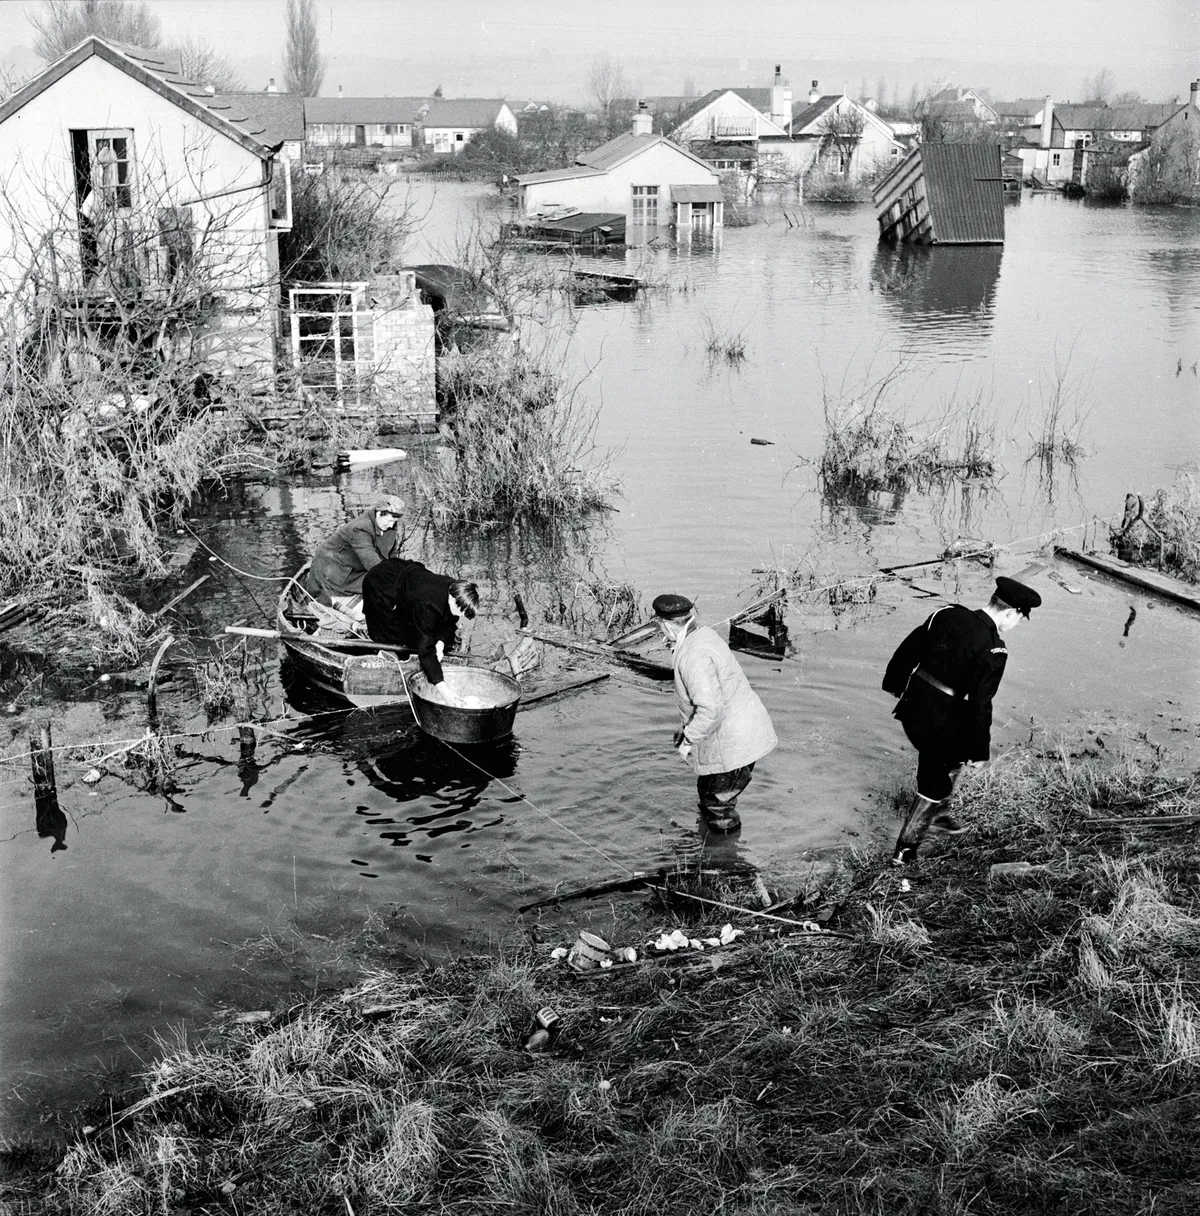 21st February 1953: Residents trying to salvage possessions from houses surrounded by floodwater on Canvey Island. Original Publication: Picture Post - 6423 - Floods - Return To Canvey Island: One Man's Story - pub. 1953 (Photo by Raymond Kleboe/Picture Post/Getty Images)